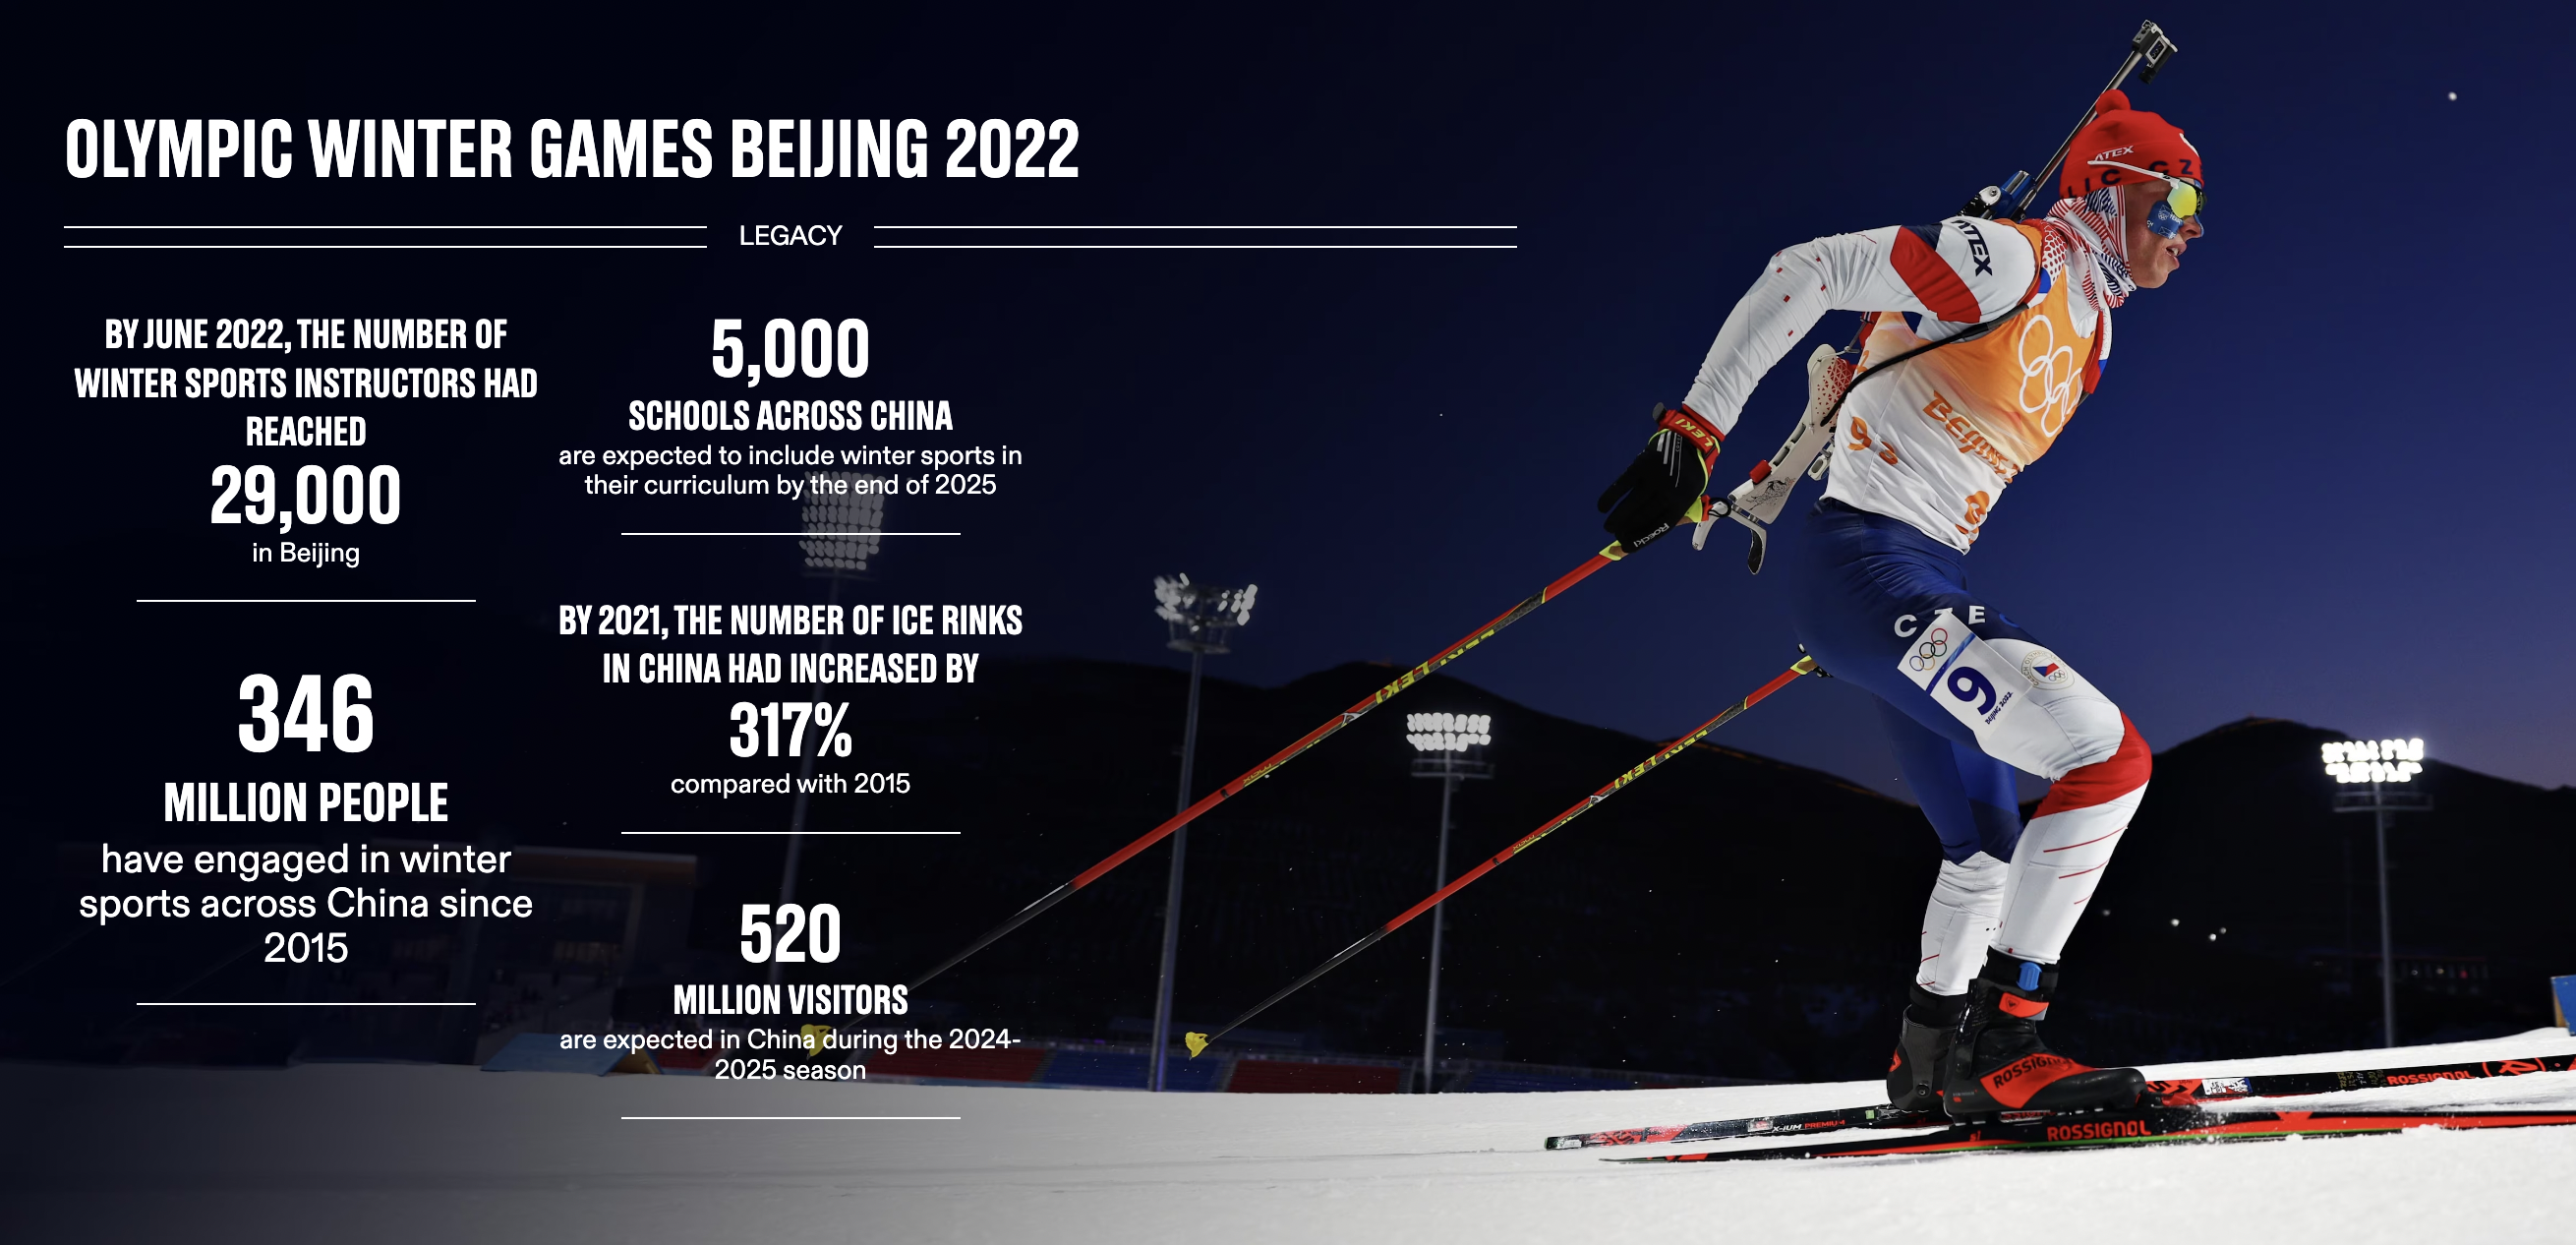 International Olympic Committee summarizes the ripple effect of the Beijing 2022 Olympic Winter Games. /IOC